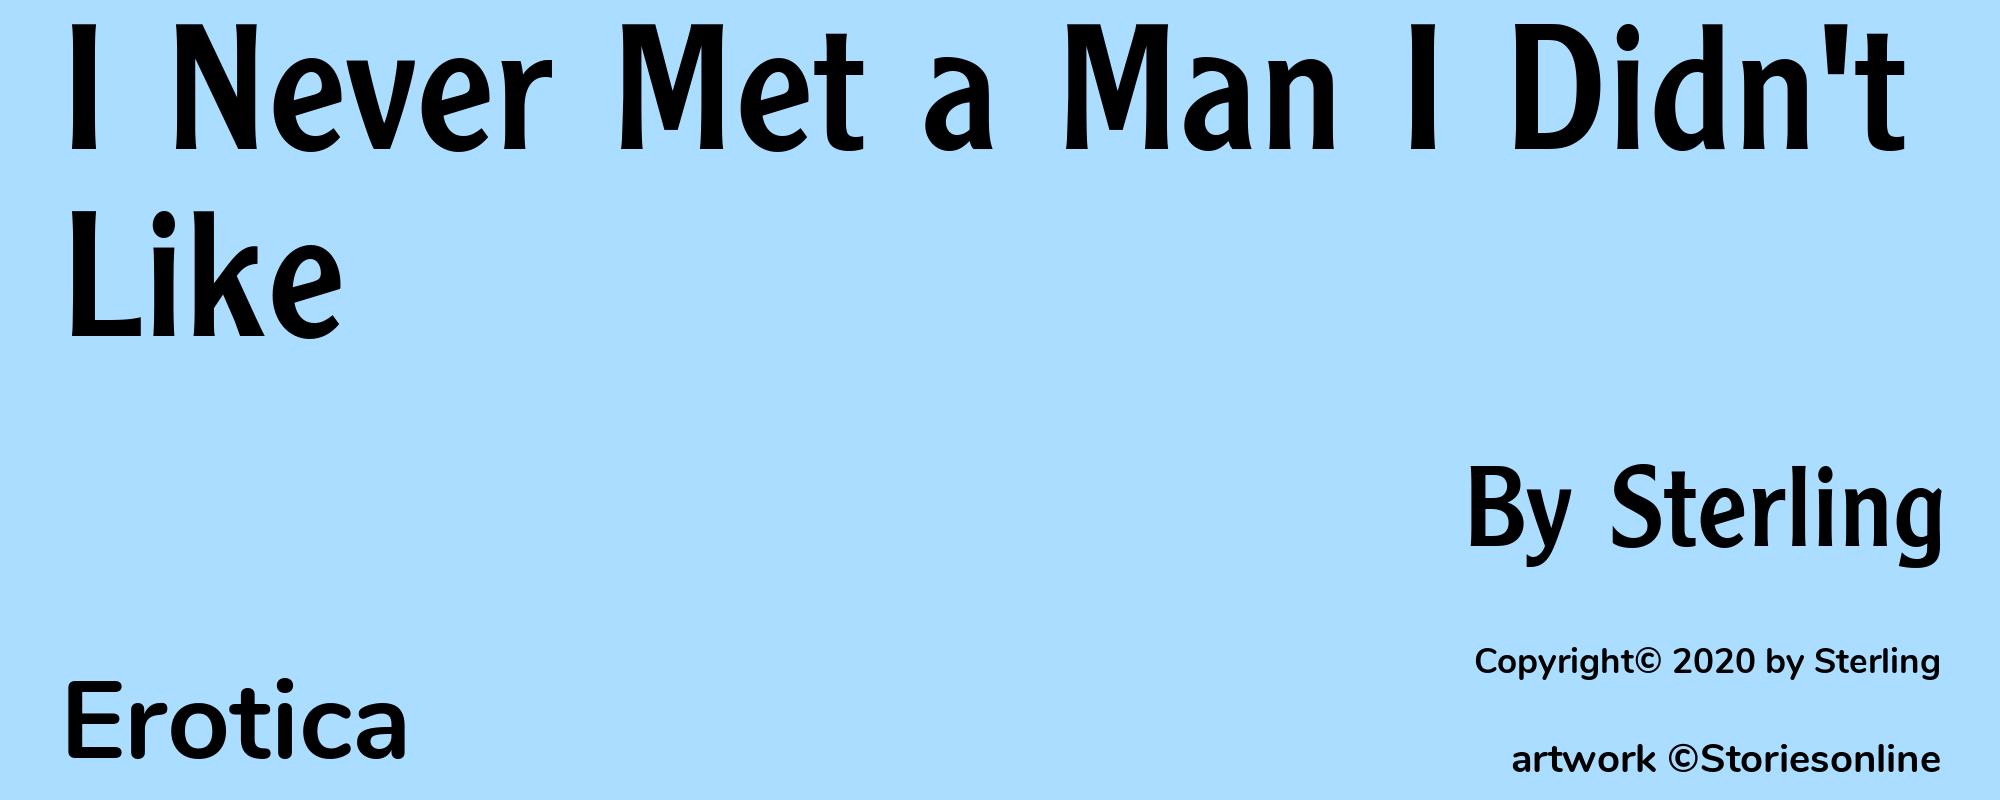 I Never Met a Man I Didn't Like - Cover